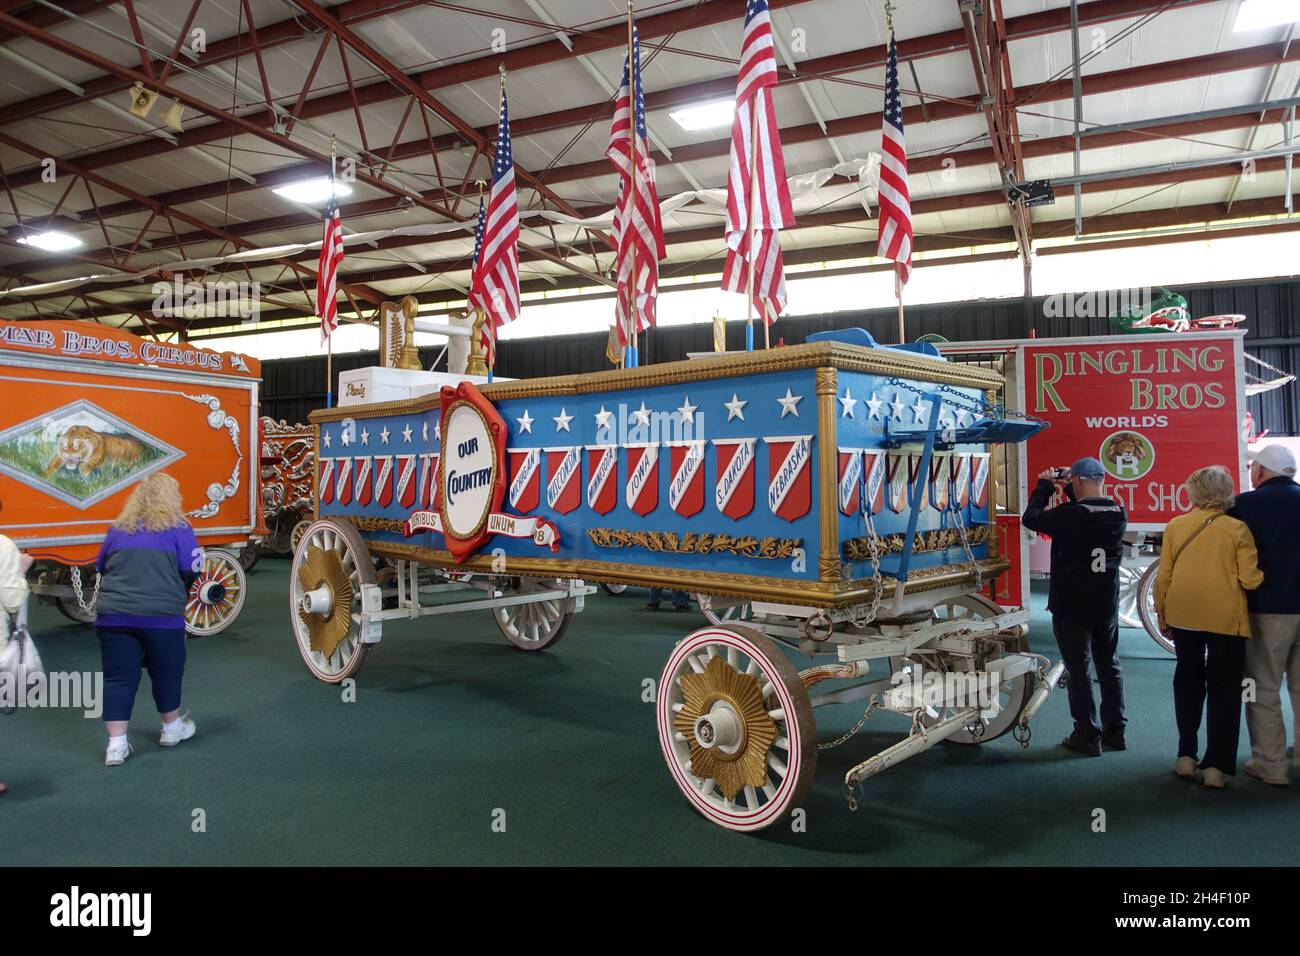 Ringling Brothers Circus, repair and maintenance facility in Baraboo WI Stock Photo